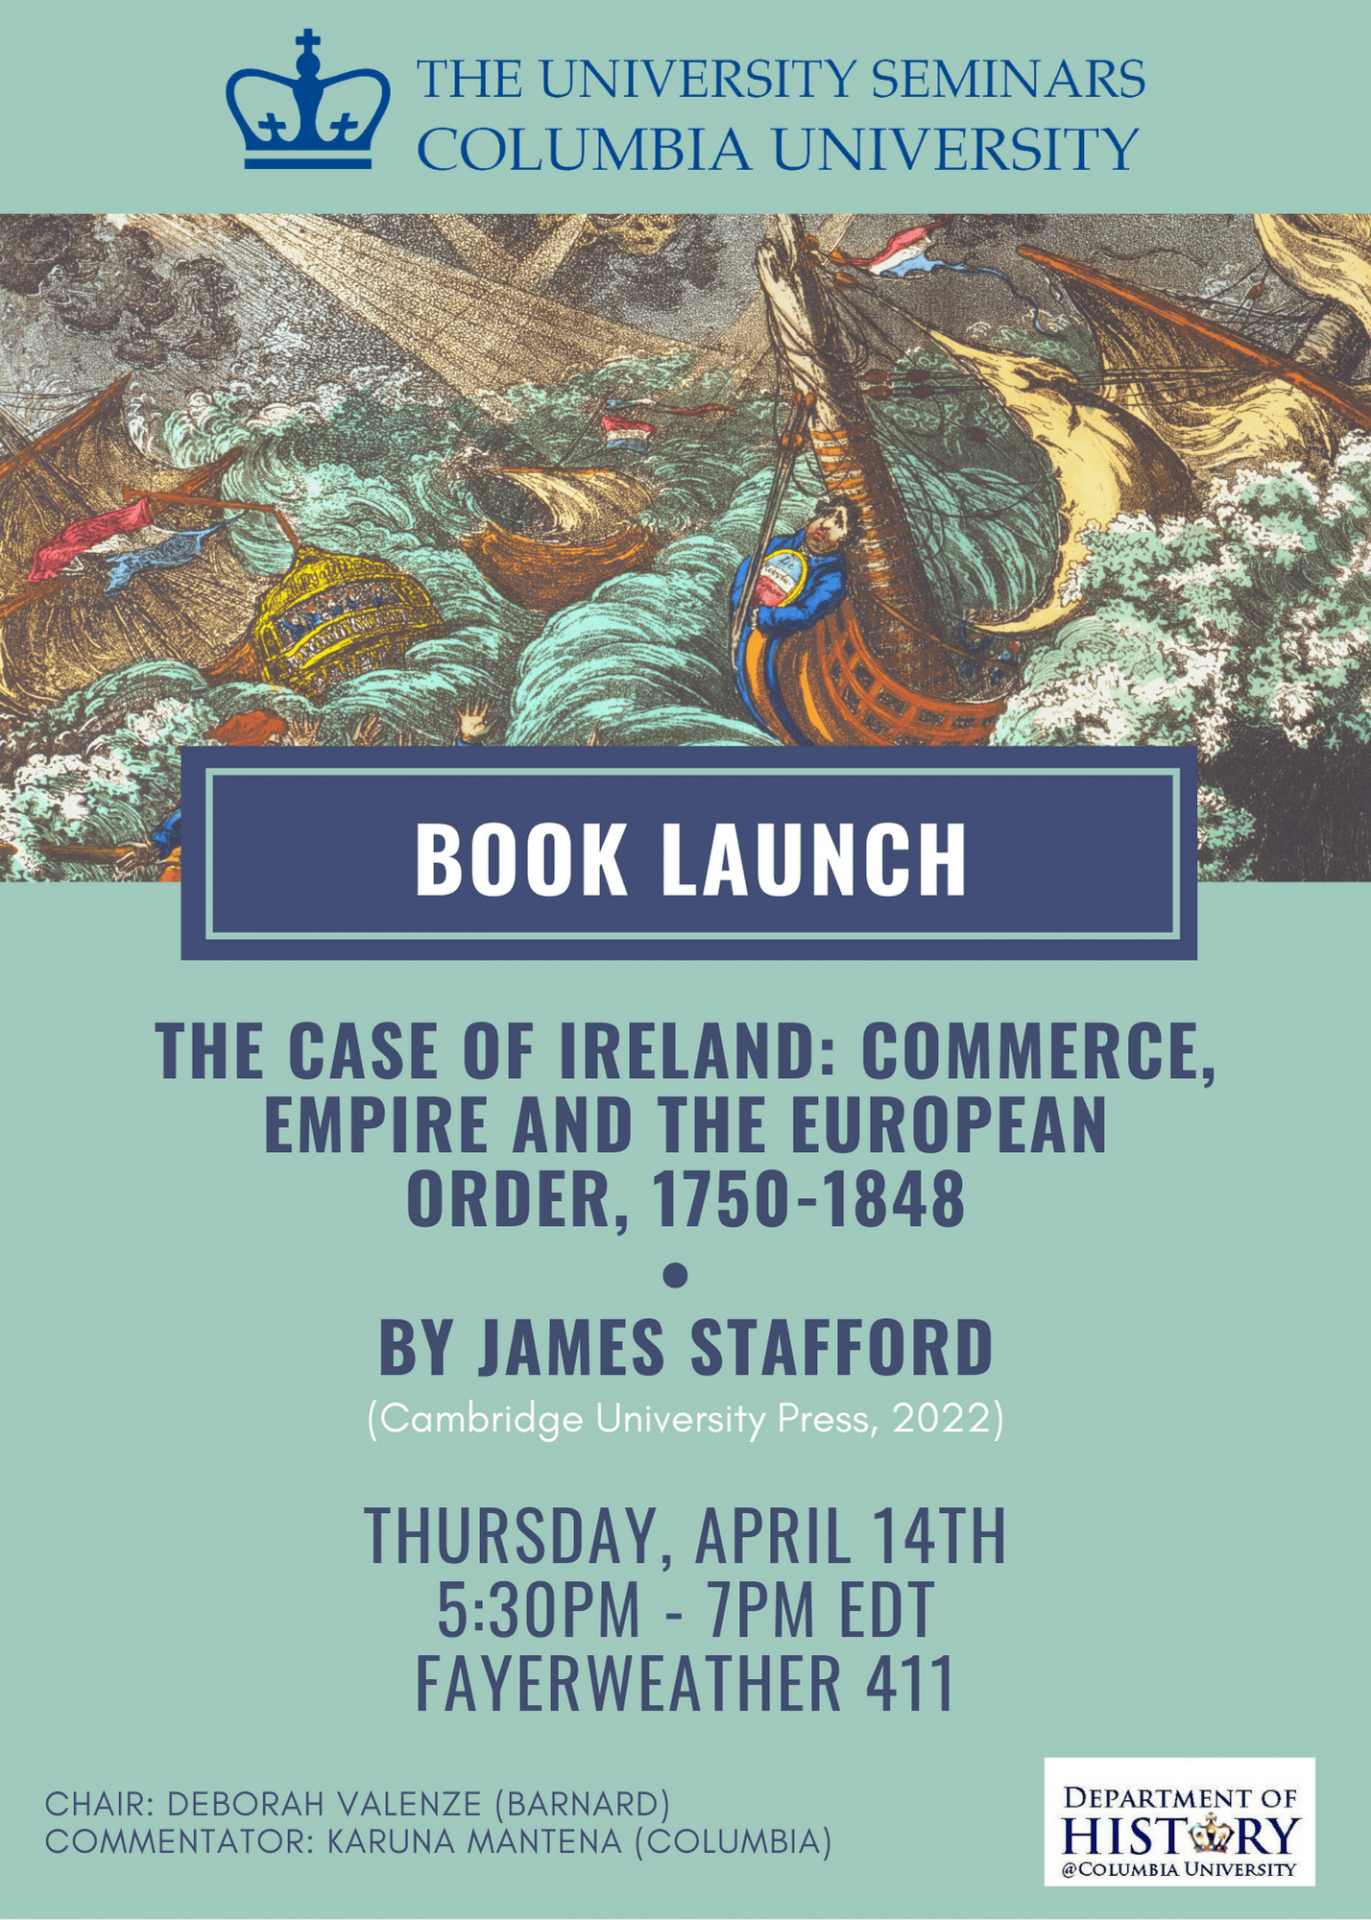 Book Launch, The University Seminars: The Case of Ireland: Commerce Empire and the European Order